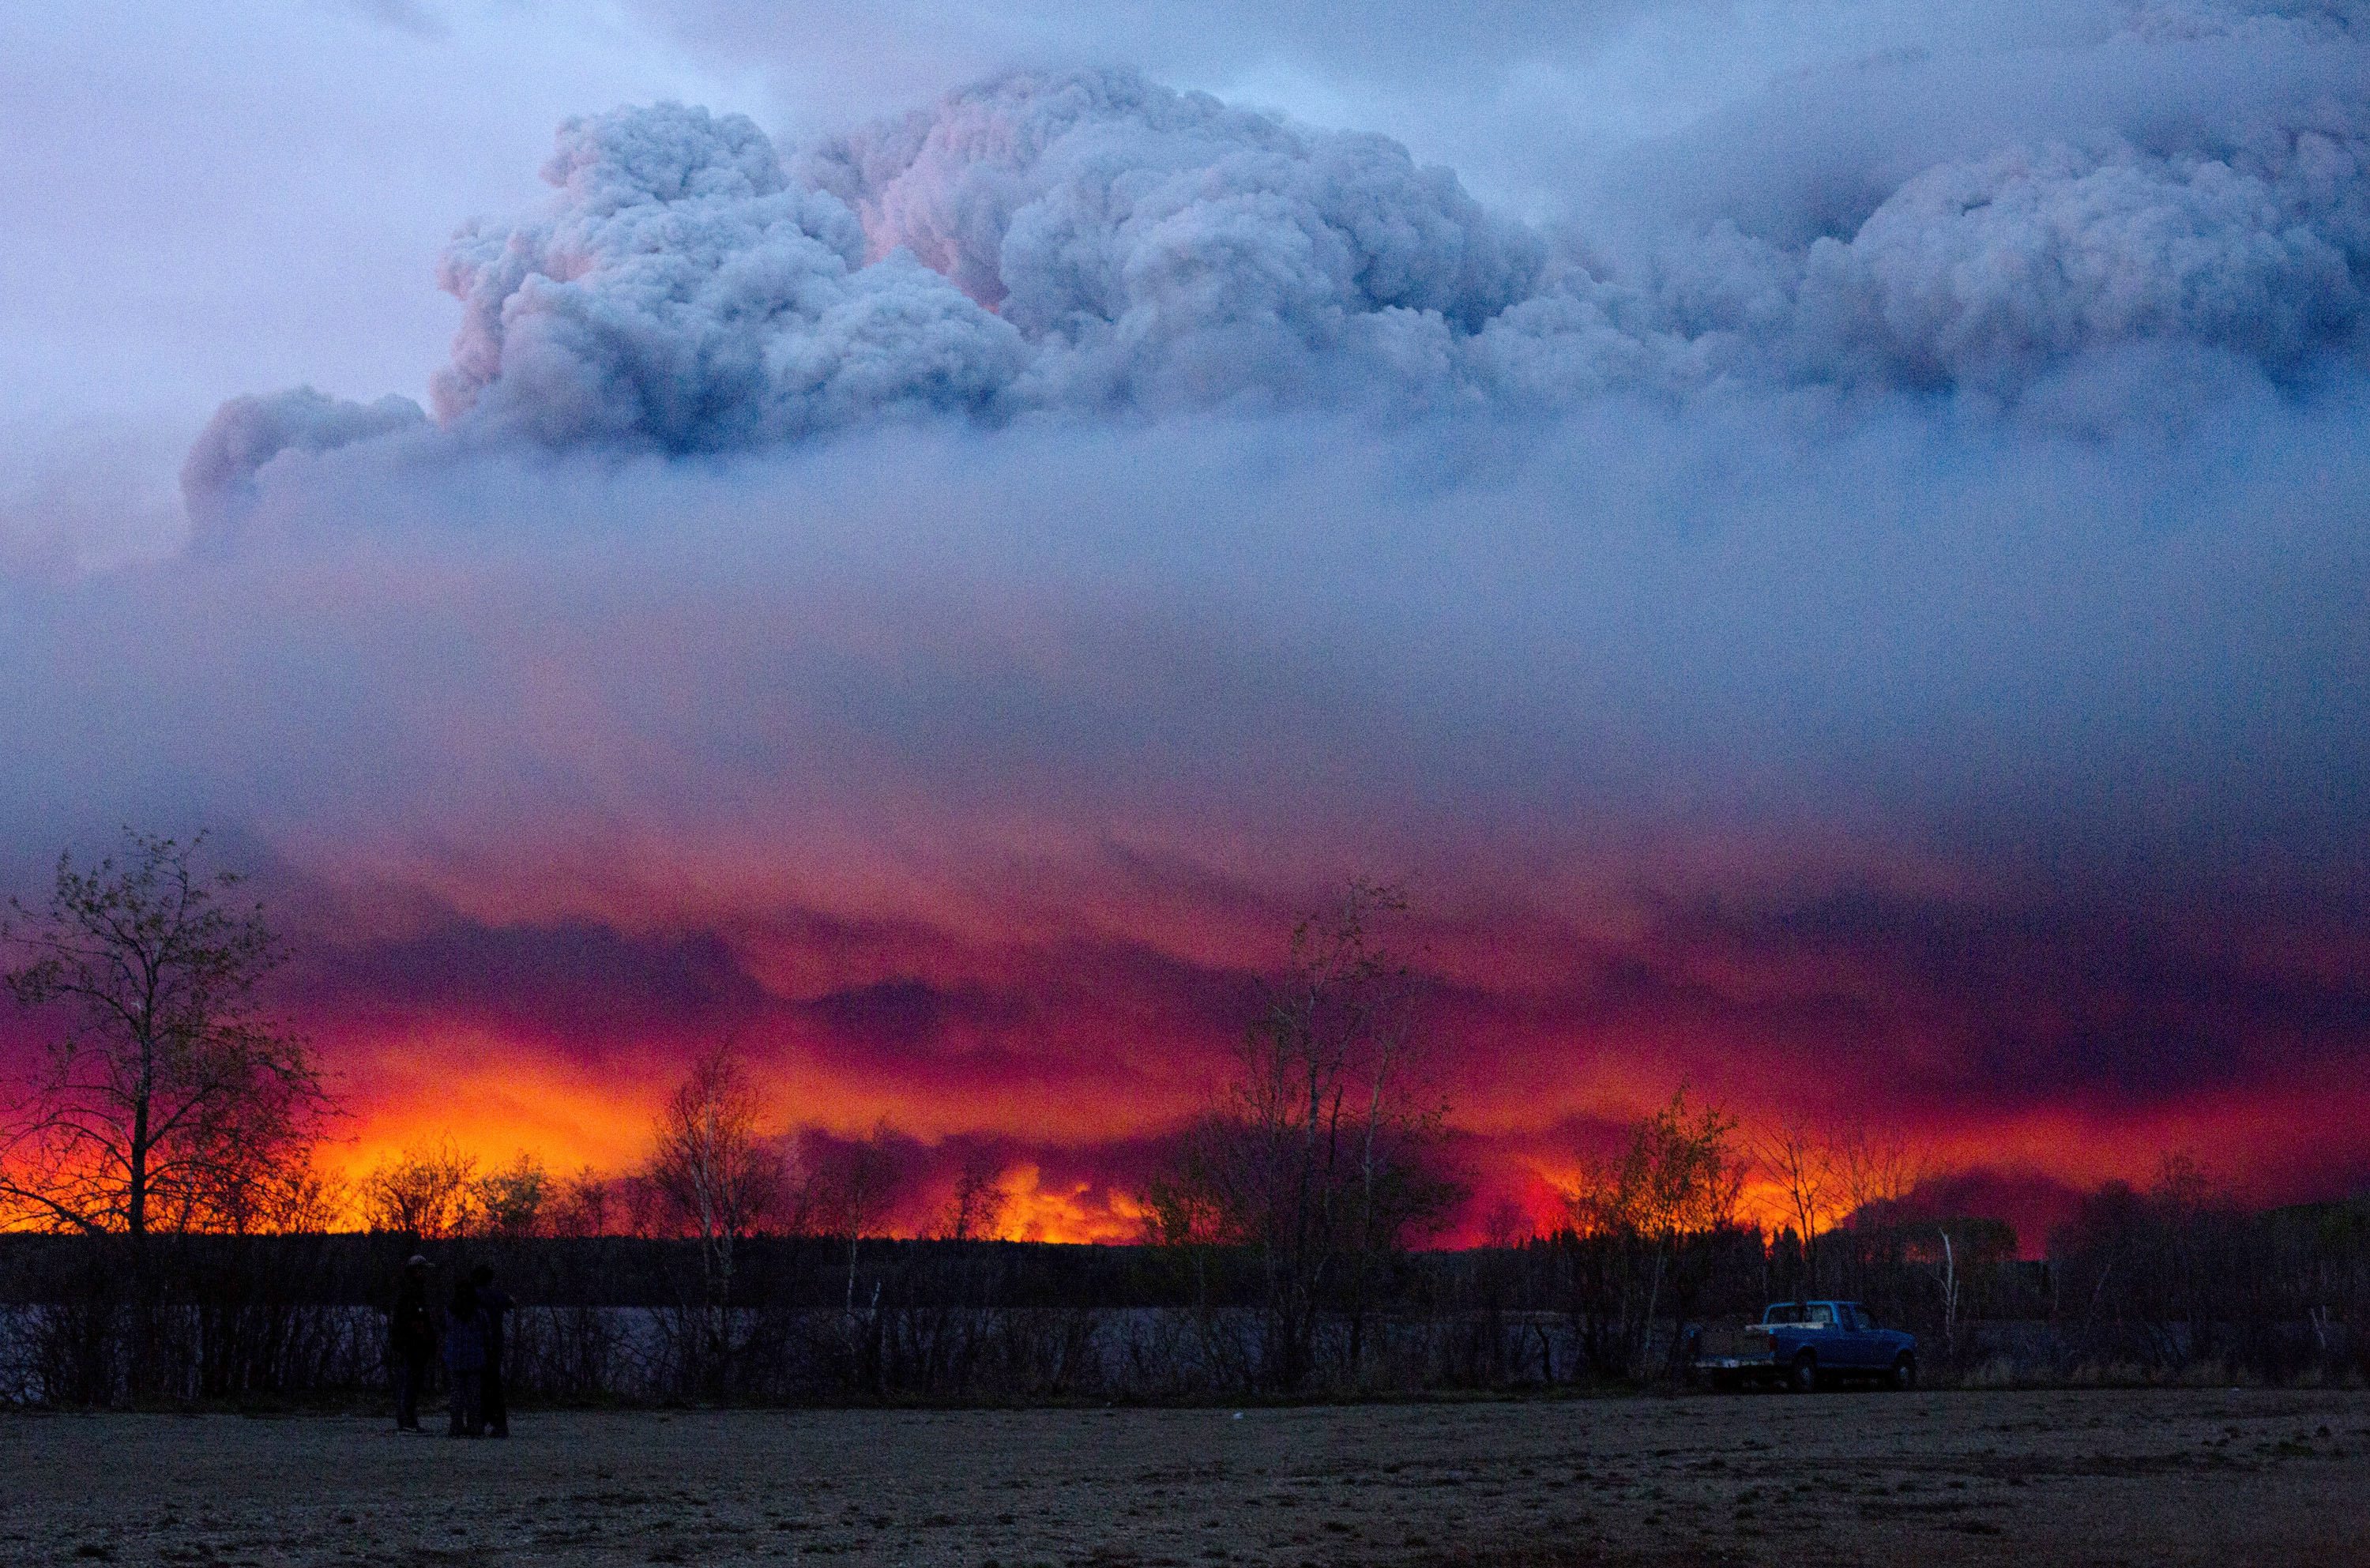 These images show how devastating the Fort McMurray fire really is